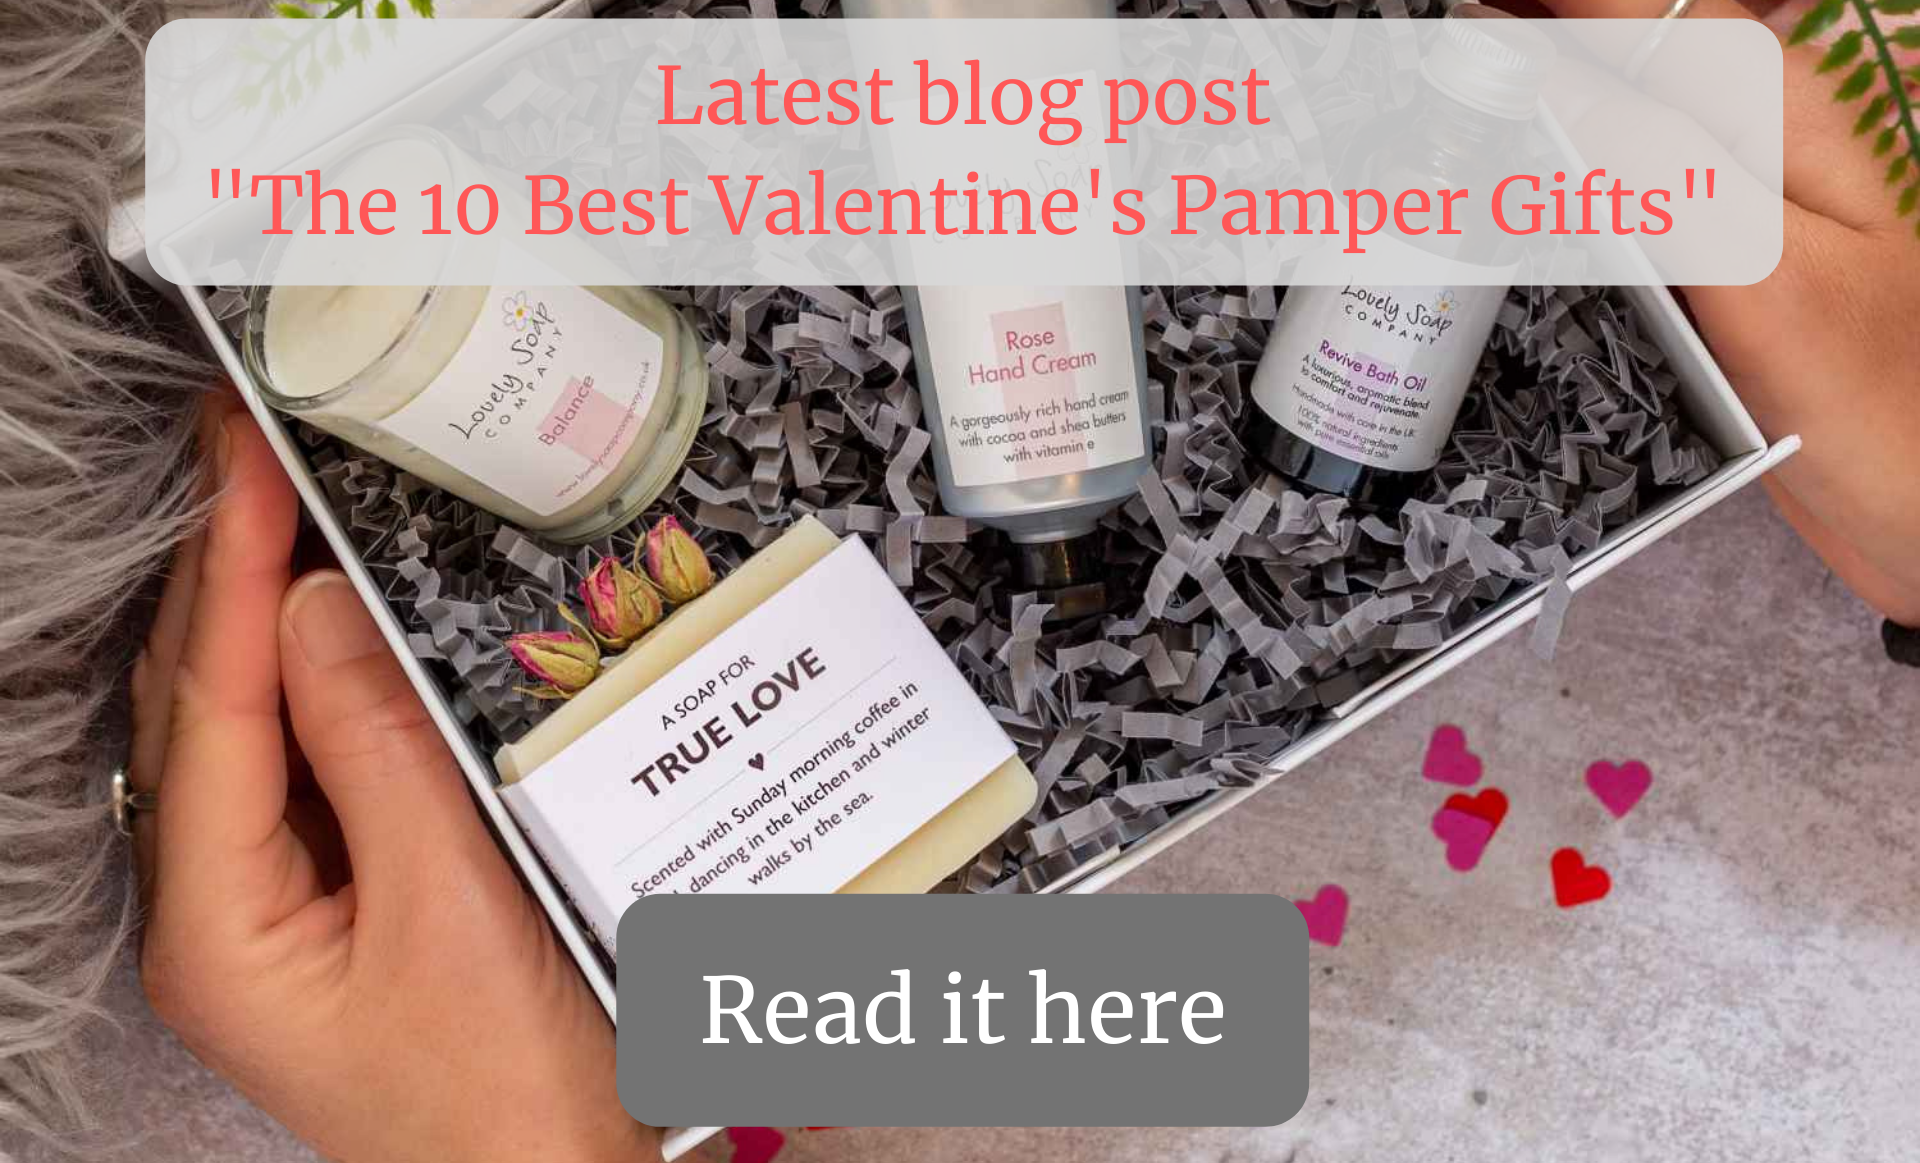 10 best valentines pamper gifts self care wellness gifting blog by Lovely Soap Co